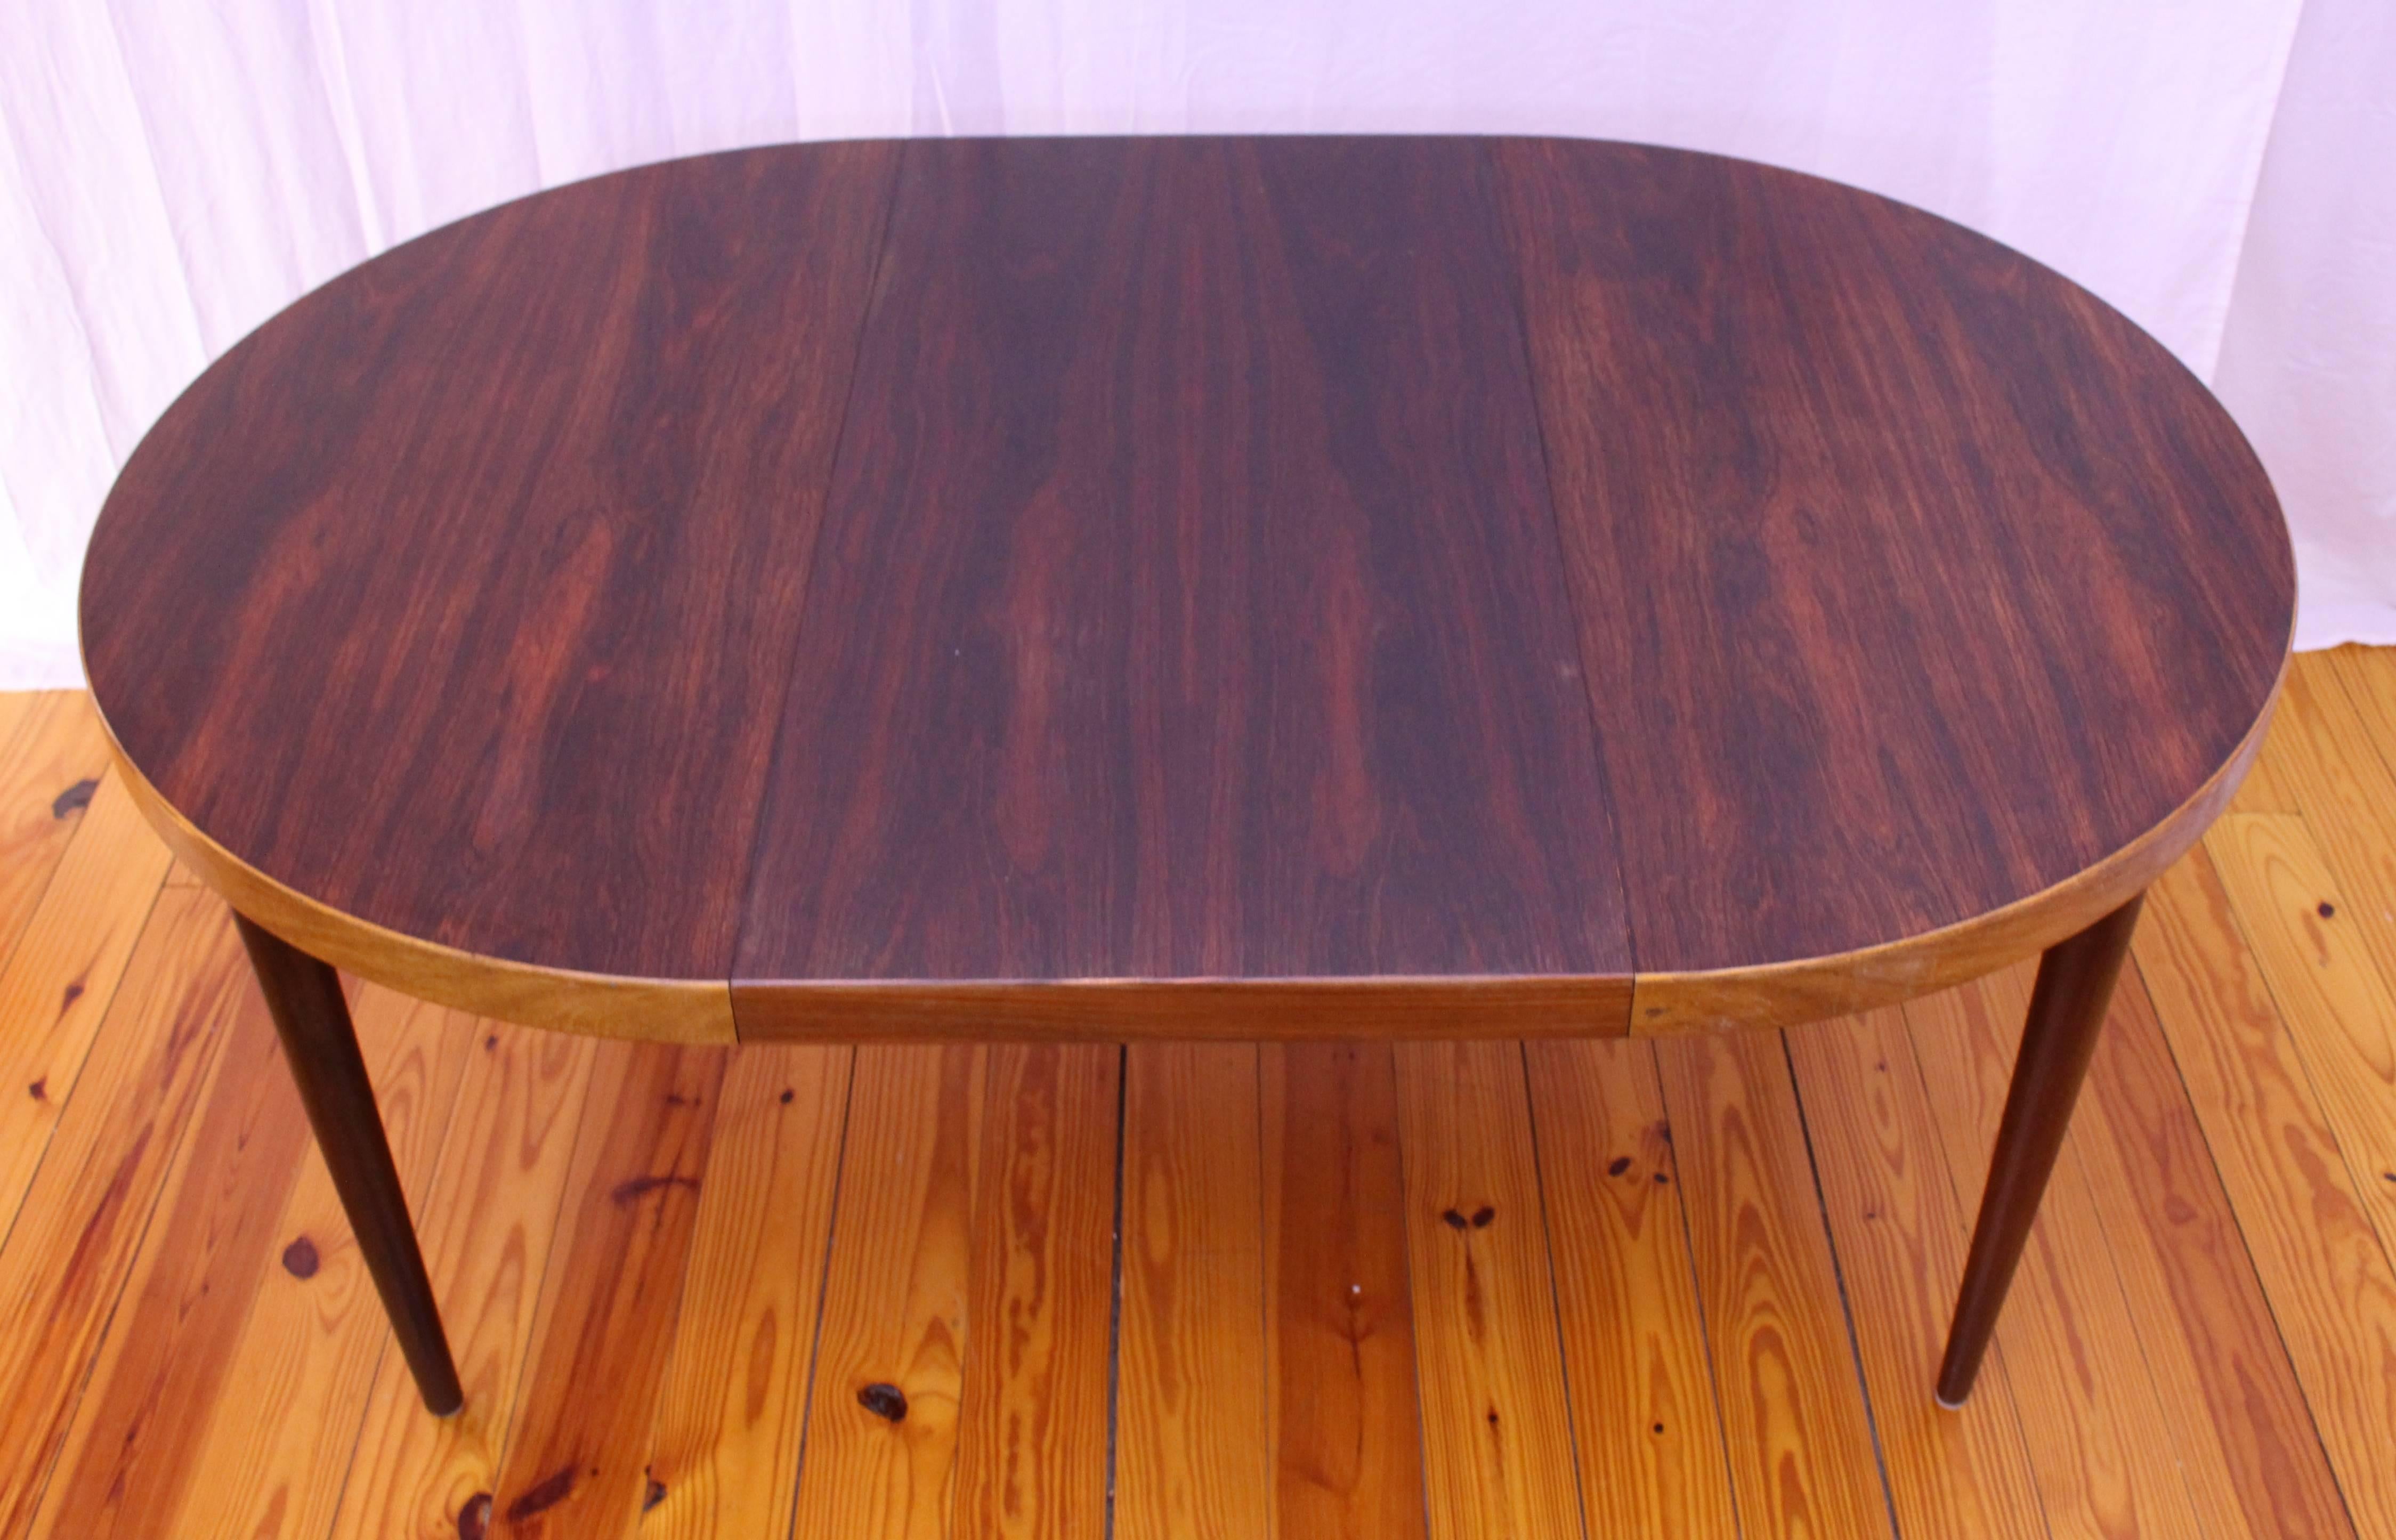 Unique and beautiful dining table designed by Kai Kristiansen. The table is made out of rosewood with a teak band around the edge encompassing the rosewood table. The teak band is lighter than the top and legs of the table and is absolutely